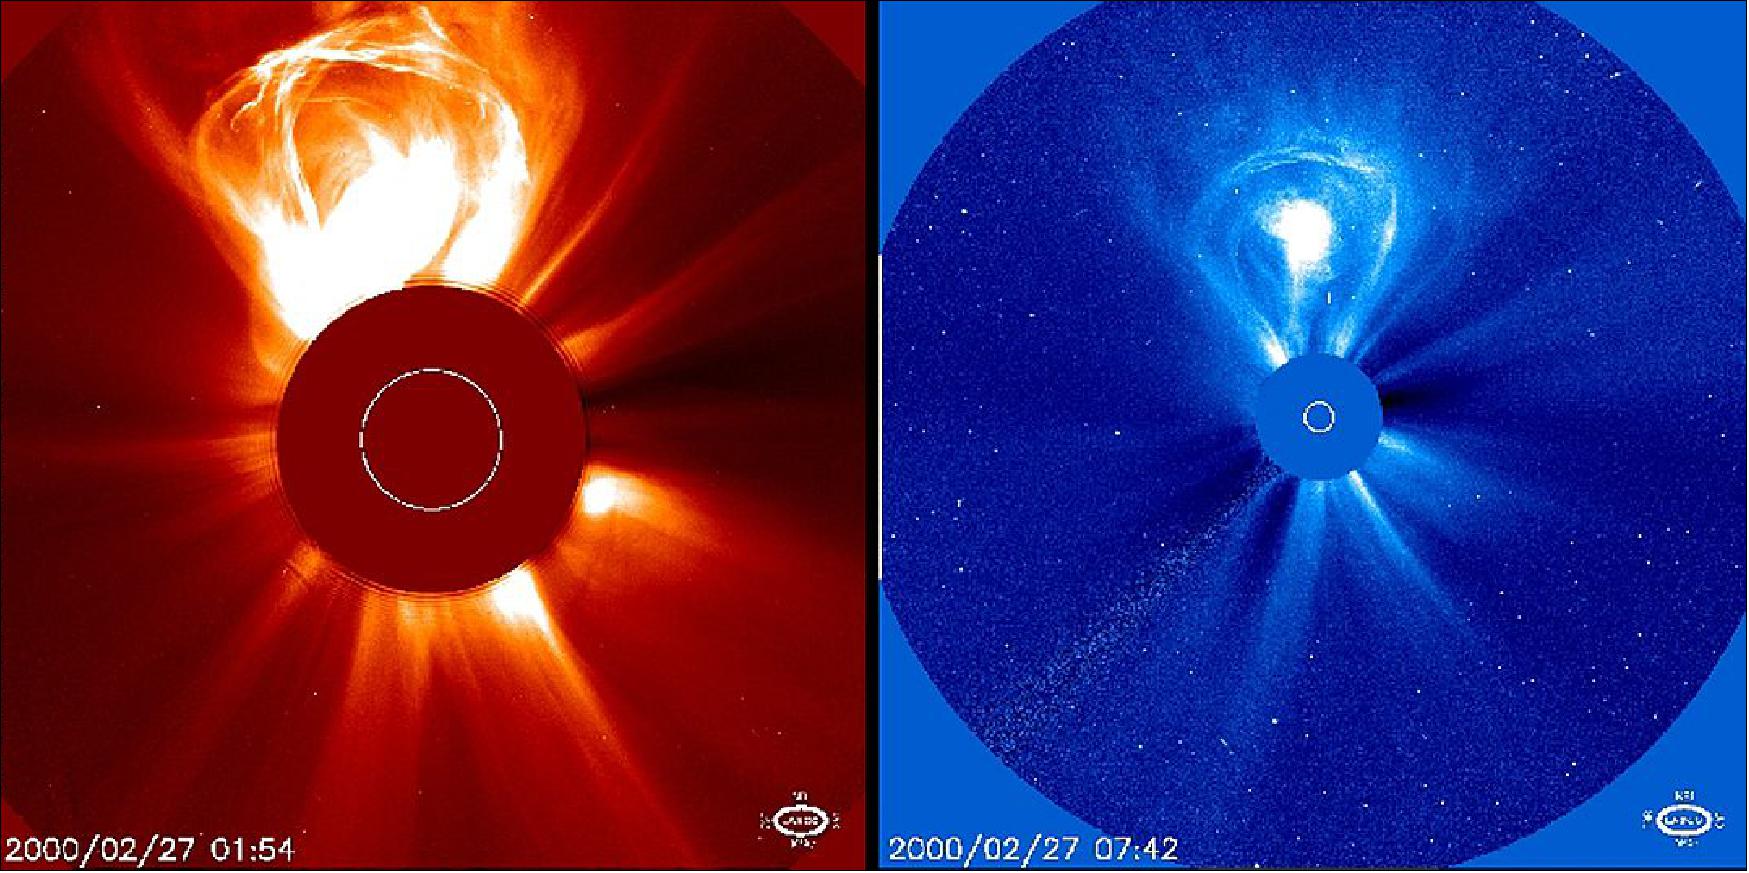 Figure 3: A coronal mass ejection event on Feb 27, 2000, captured by the LASCO instruments C2 and C3 on ESA's SOHO mission (image credit: ESA SOHO & NASA)